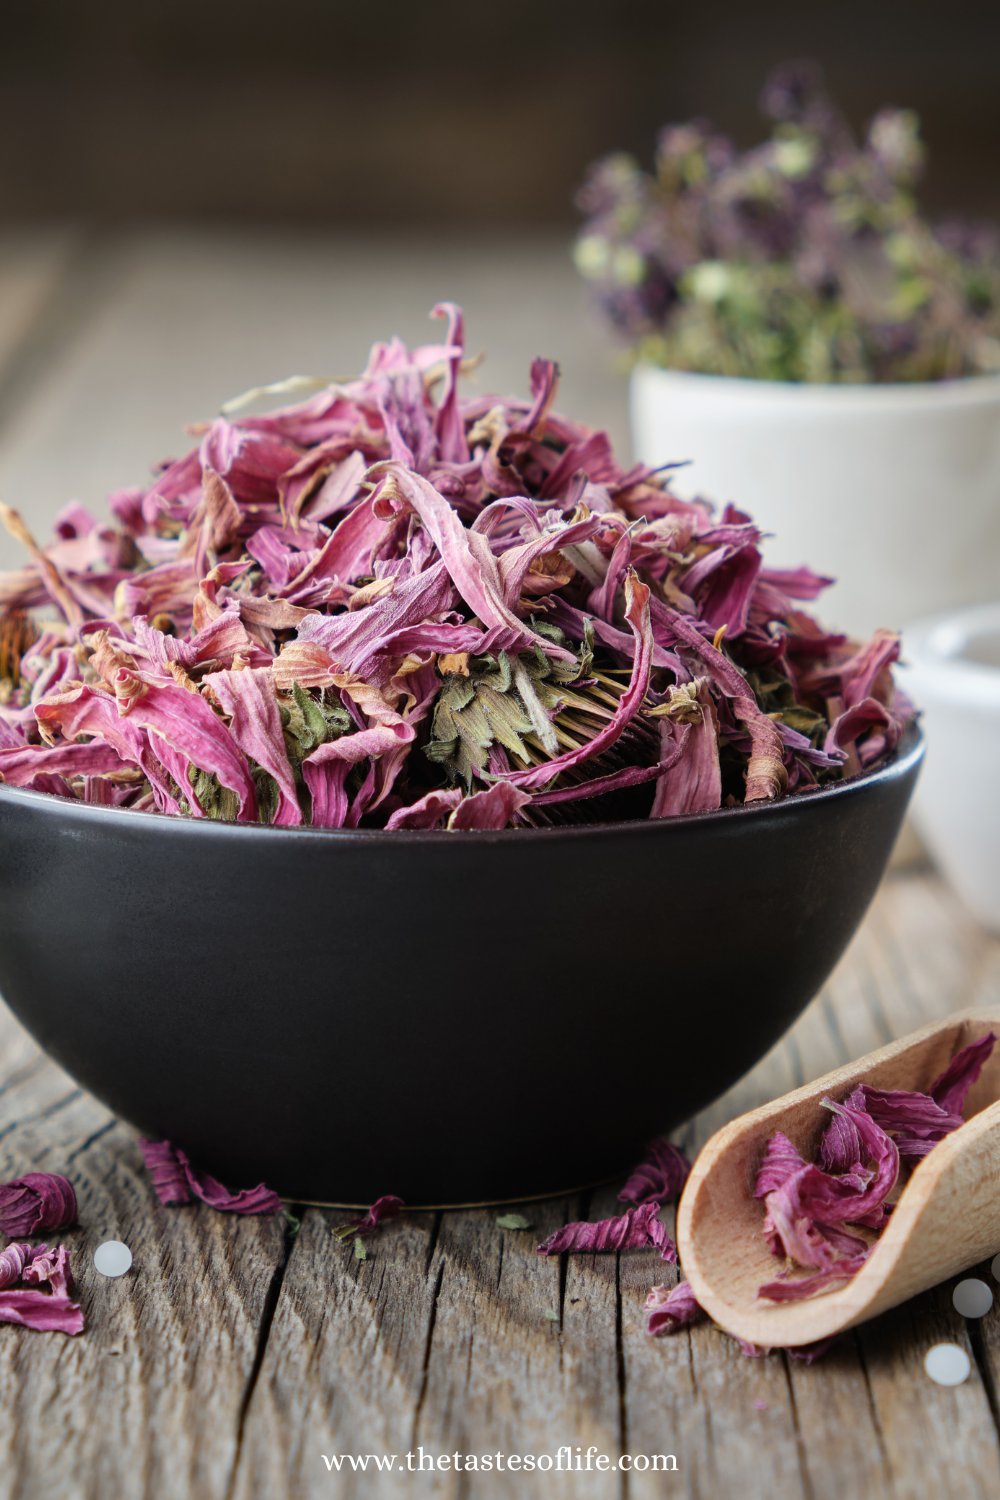 What Herbs to Use for Cold Weather Wellness